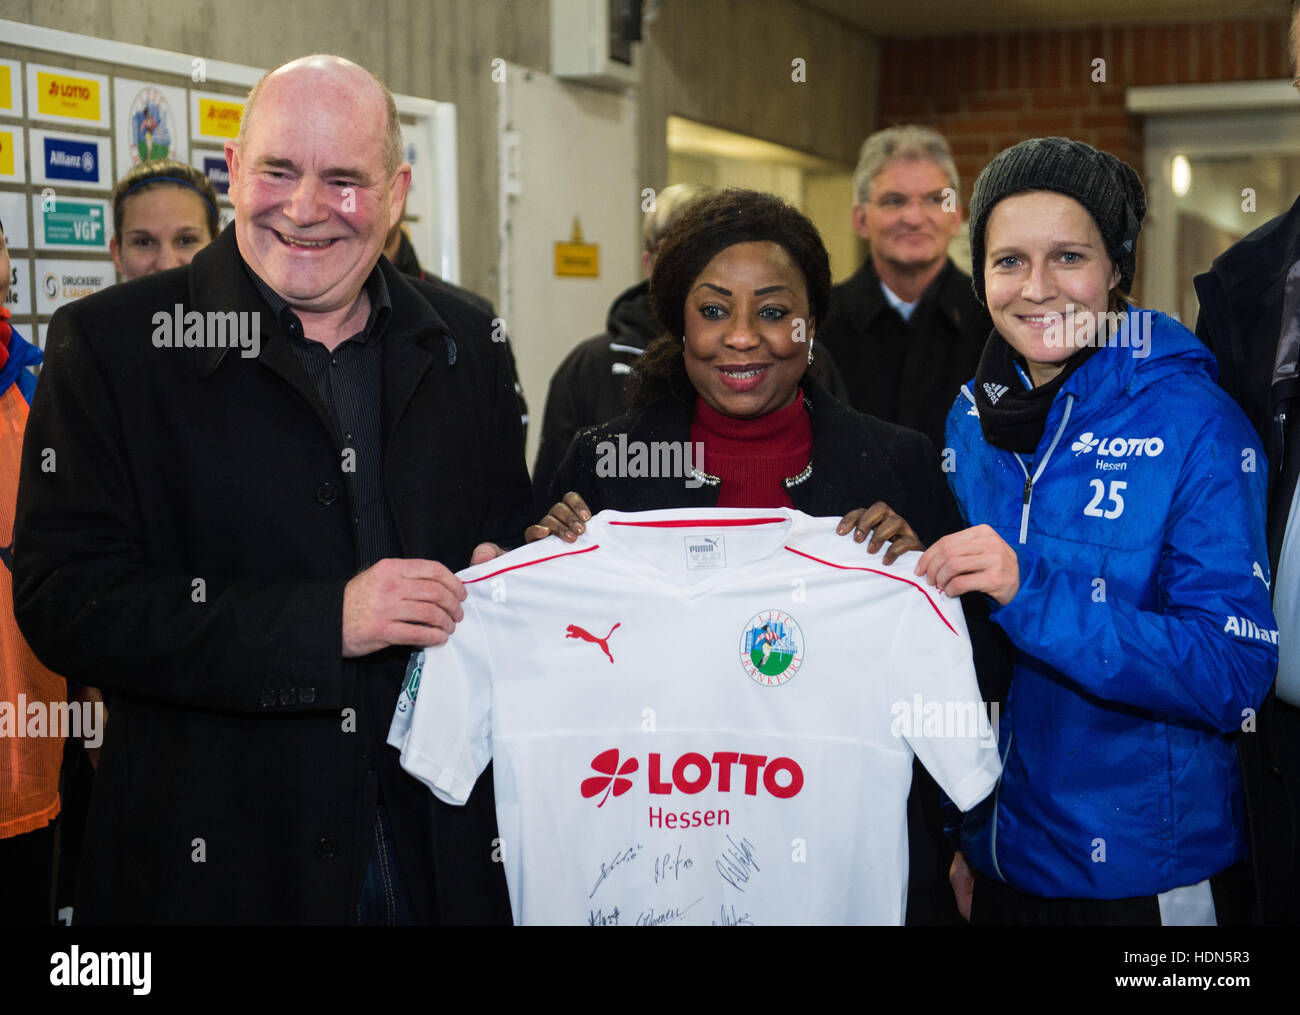 Frankfurt, Germany. 13th Dec, 2016. FIFA General Secretary Fatma Samoura (C), FCC Frankfurt coach Siegfried Dietrich and player Saskia Bartusiak with a jersey signed by the club's players in the Brentanobad Stadium in Frankfurt am Main, Germany, 13 December 2016. Samoura was invited by the German Soccer Association (DFB) to the first league women's soccer team FCC Frankfurt. © dpa picture alliance/Alamy Live News Stock Photo